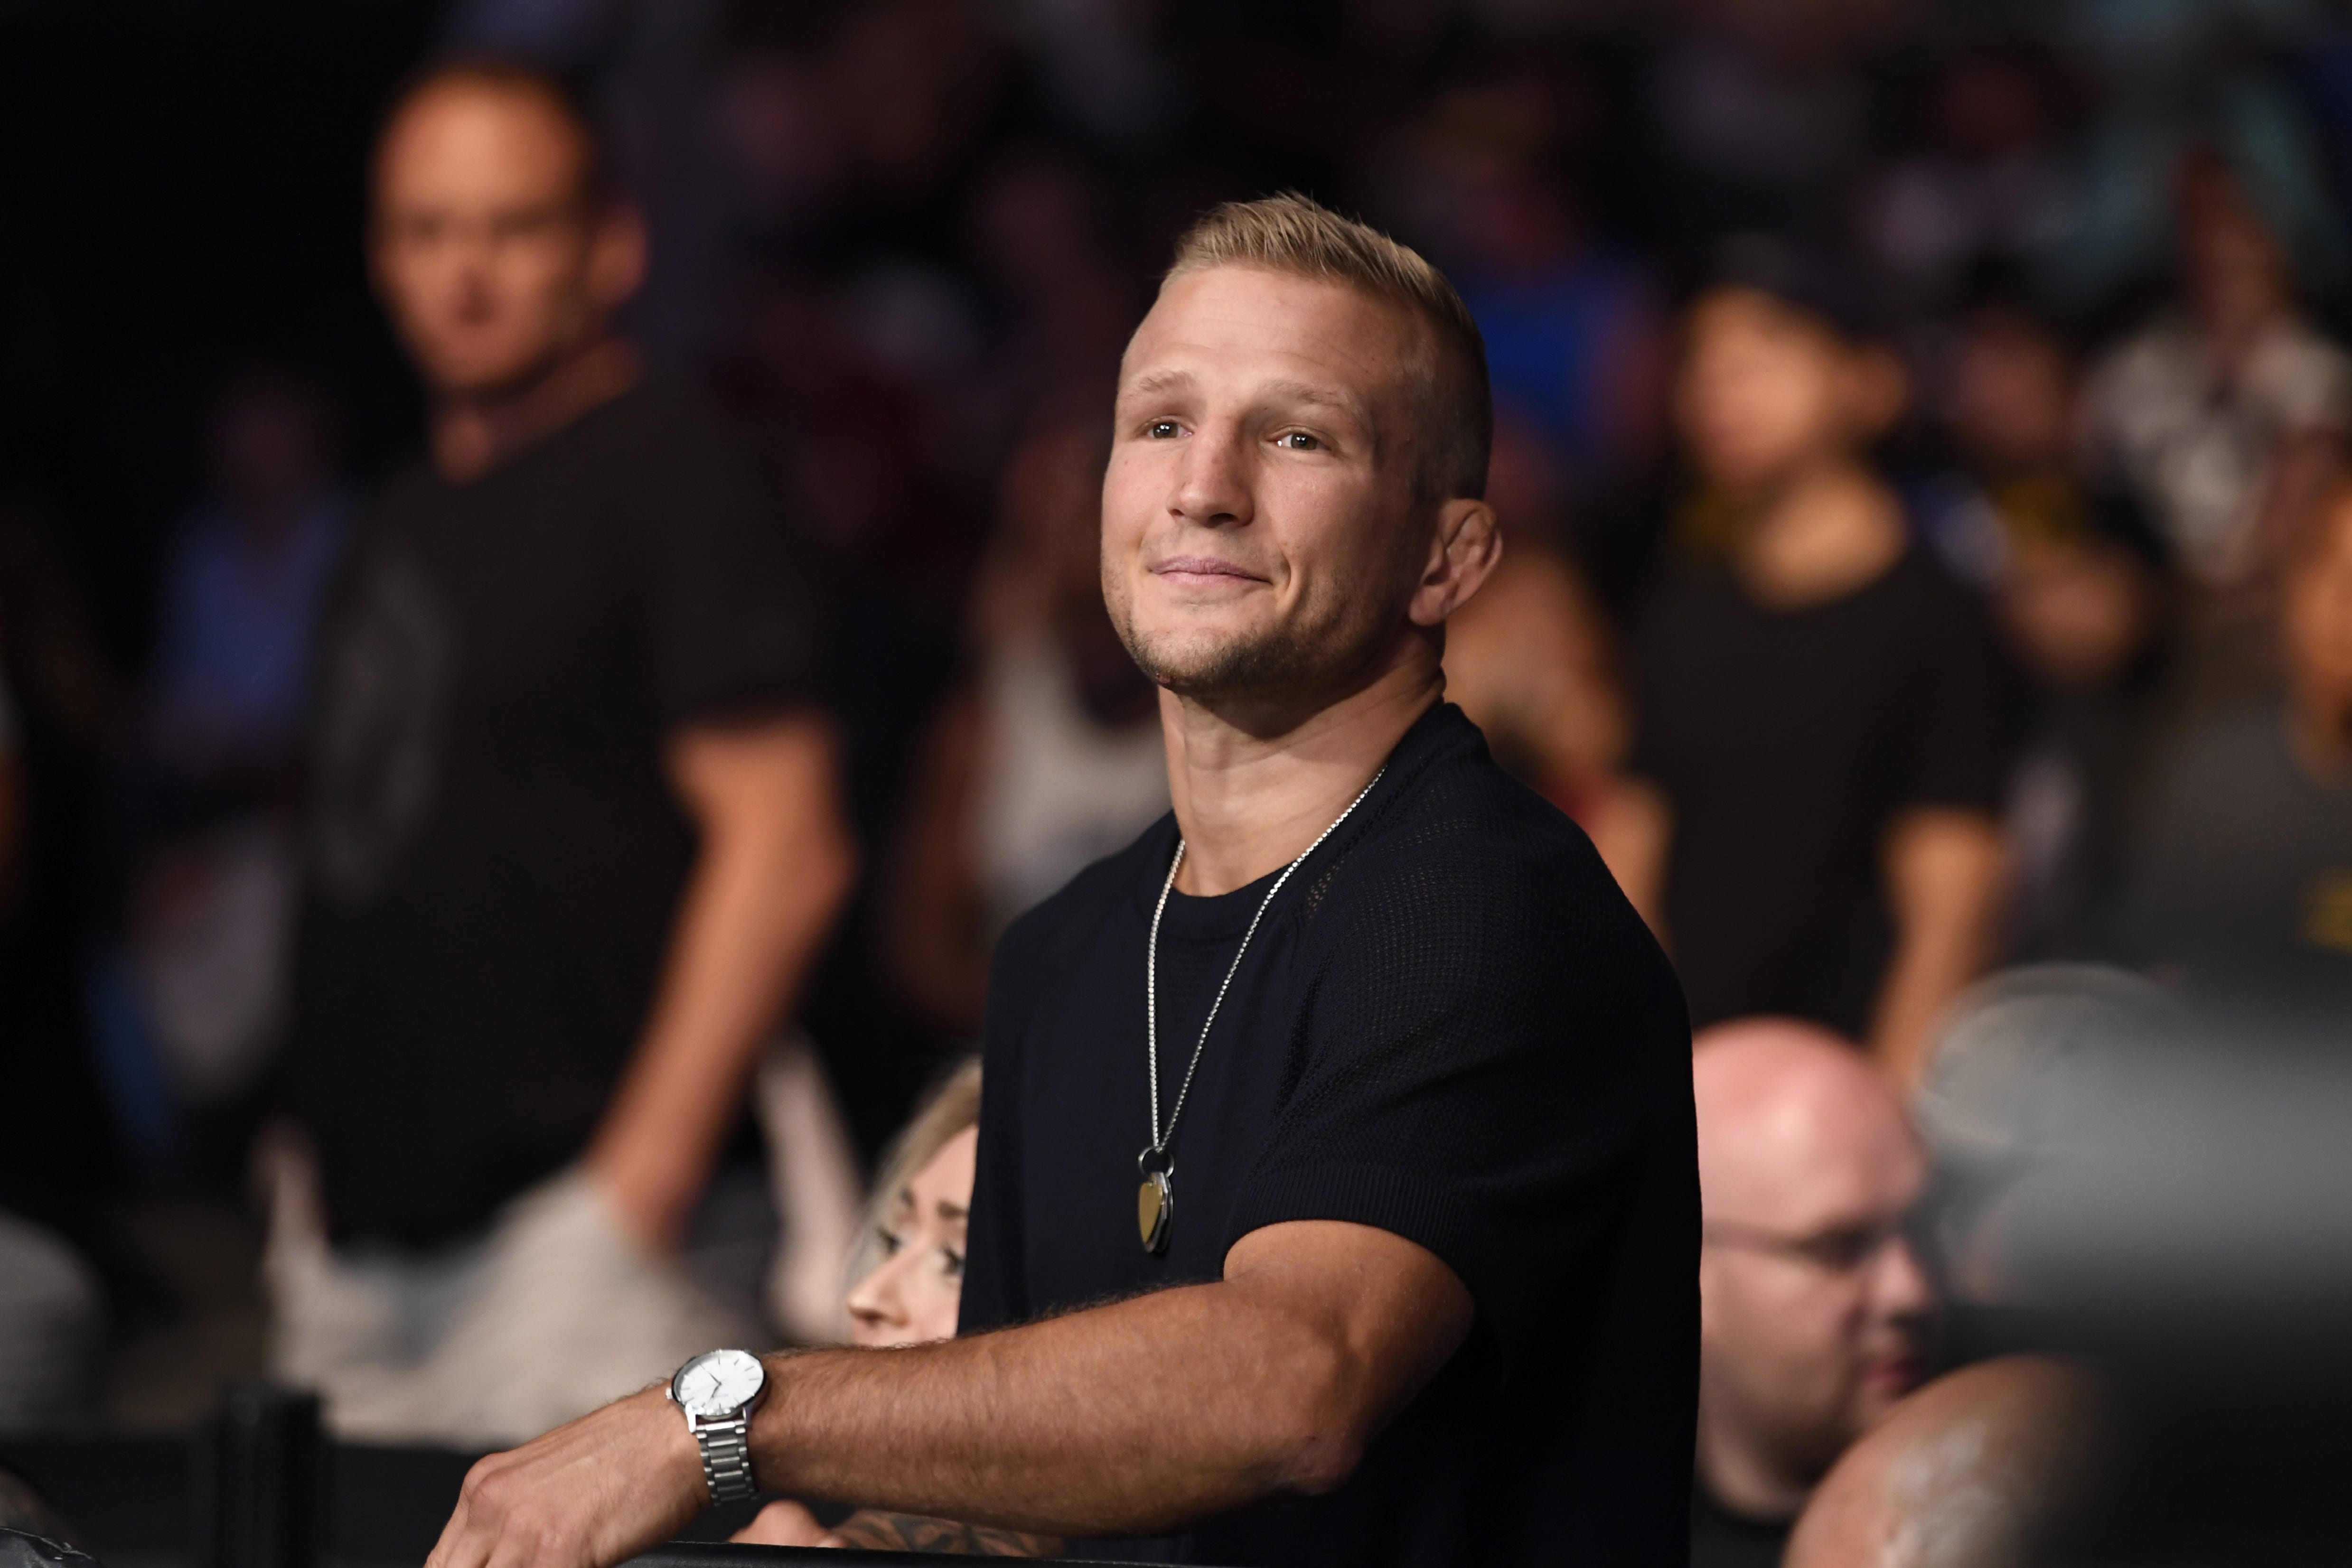 TJ Dillashaw issues a response to UFC callouts.